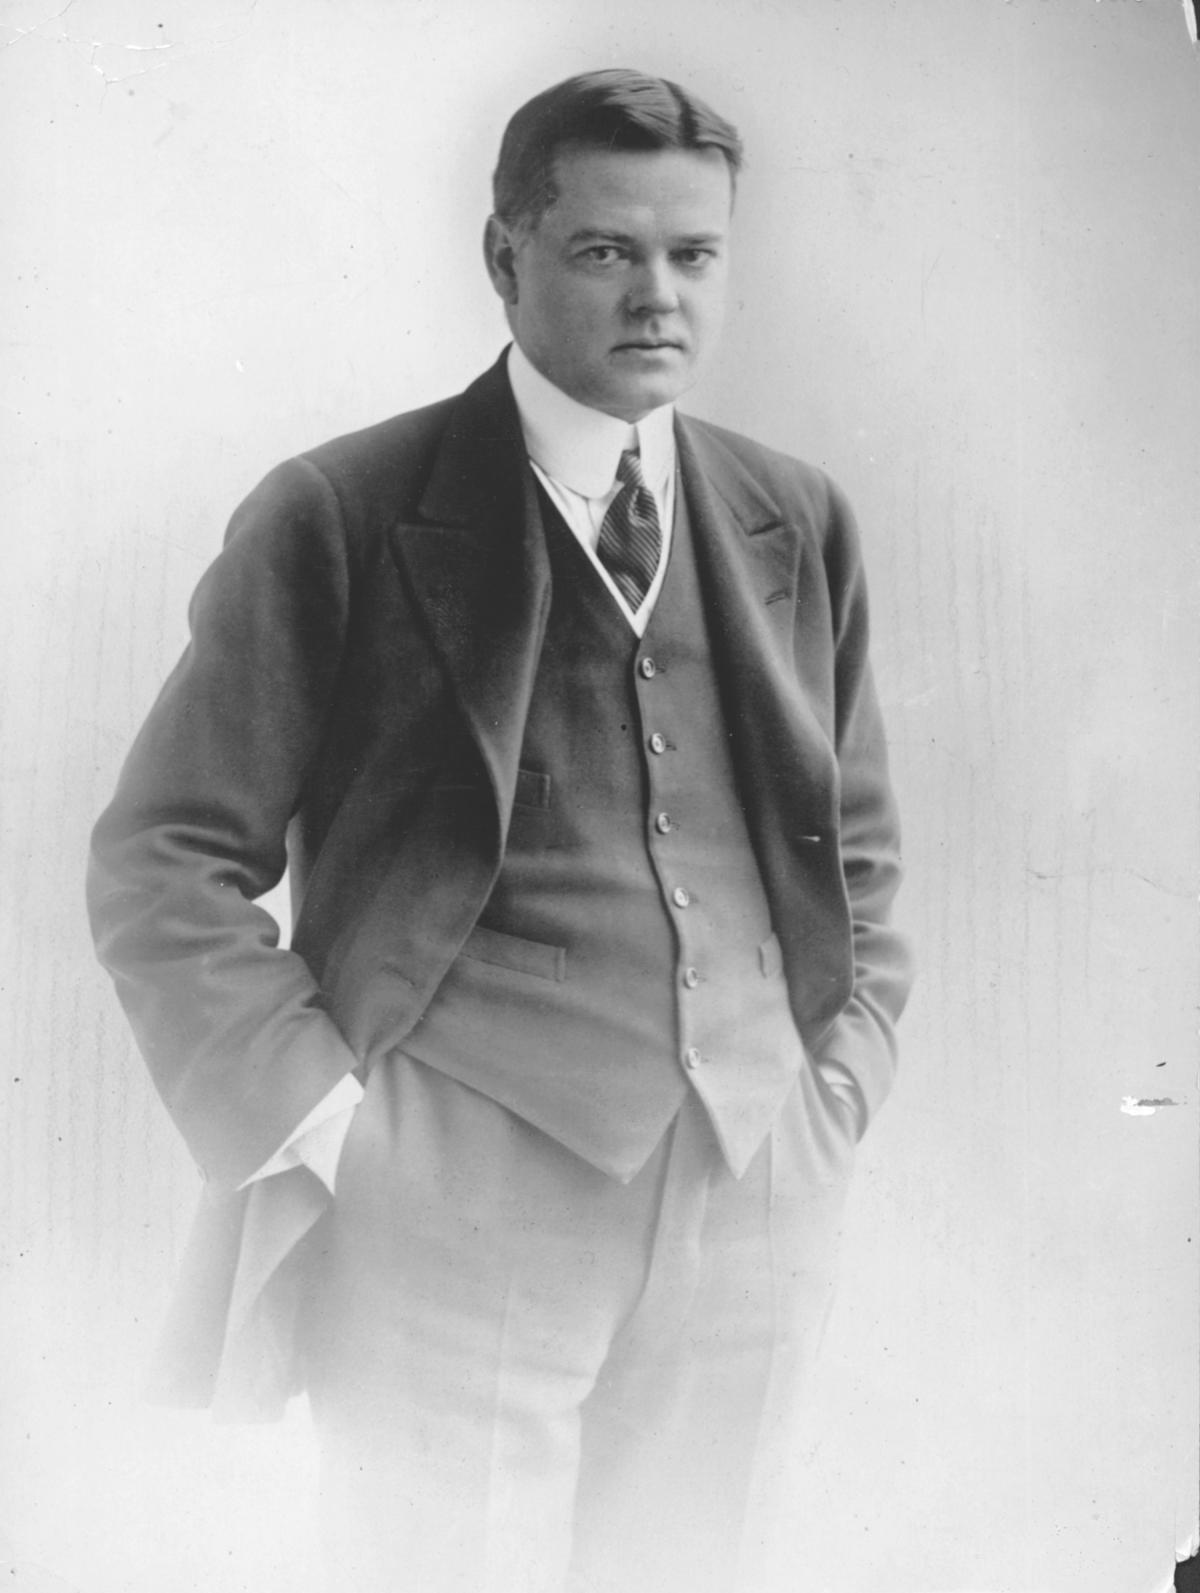 Hoover standing with hands in pockets, wearing a dark suit, hair slicked back